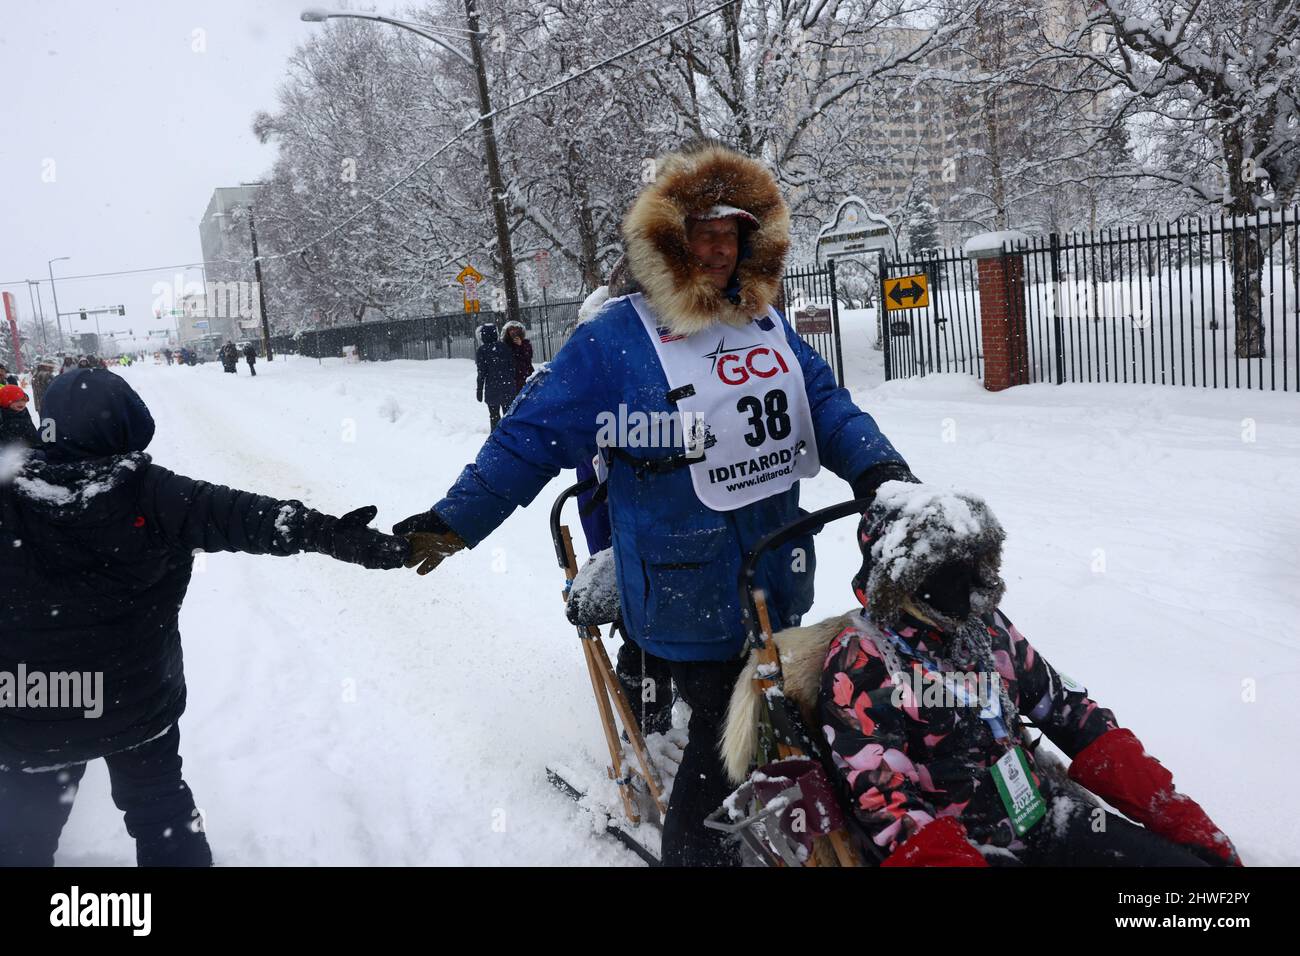 Martin Buser during the ceremonial start of the 50th Iditarod Trail Sled  Dog Race in Anchorage, Alaska, U.S. March 5, 2022. REUTERS/Kerry Tasker  Stock Photo - Alamy